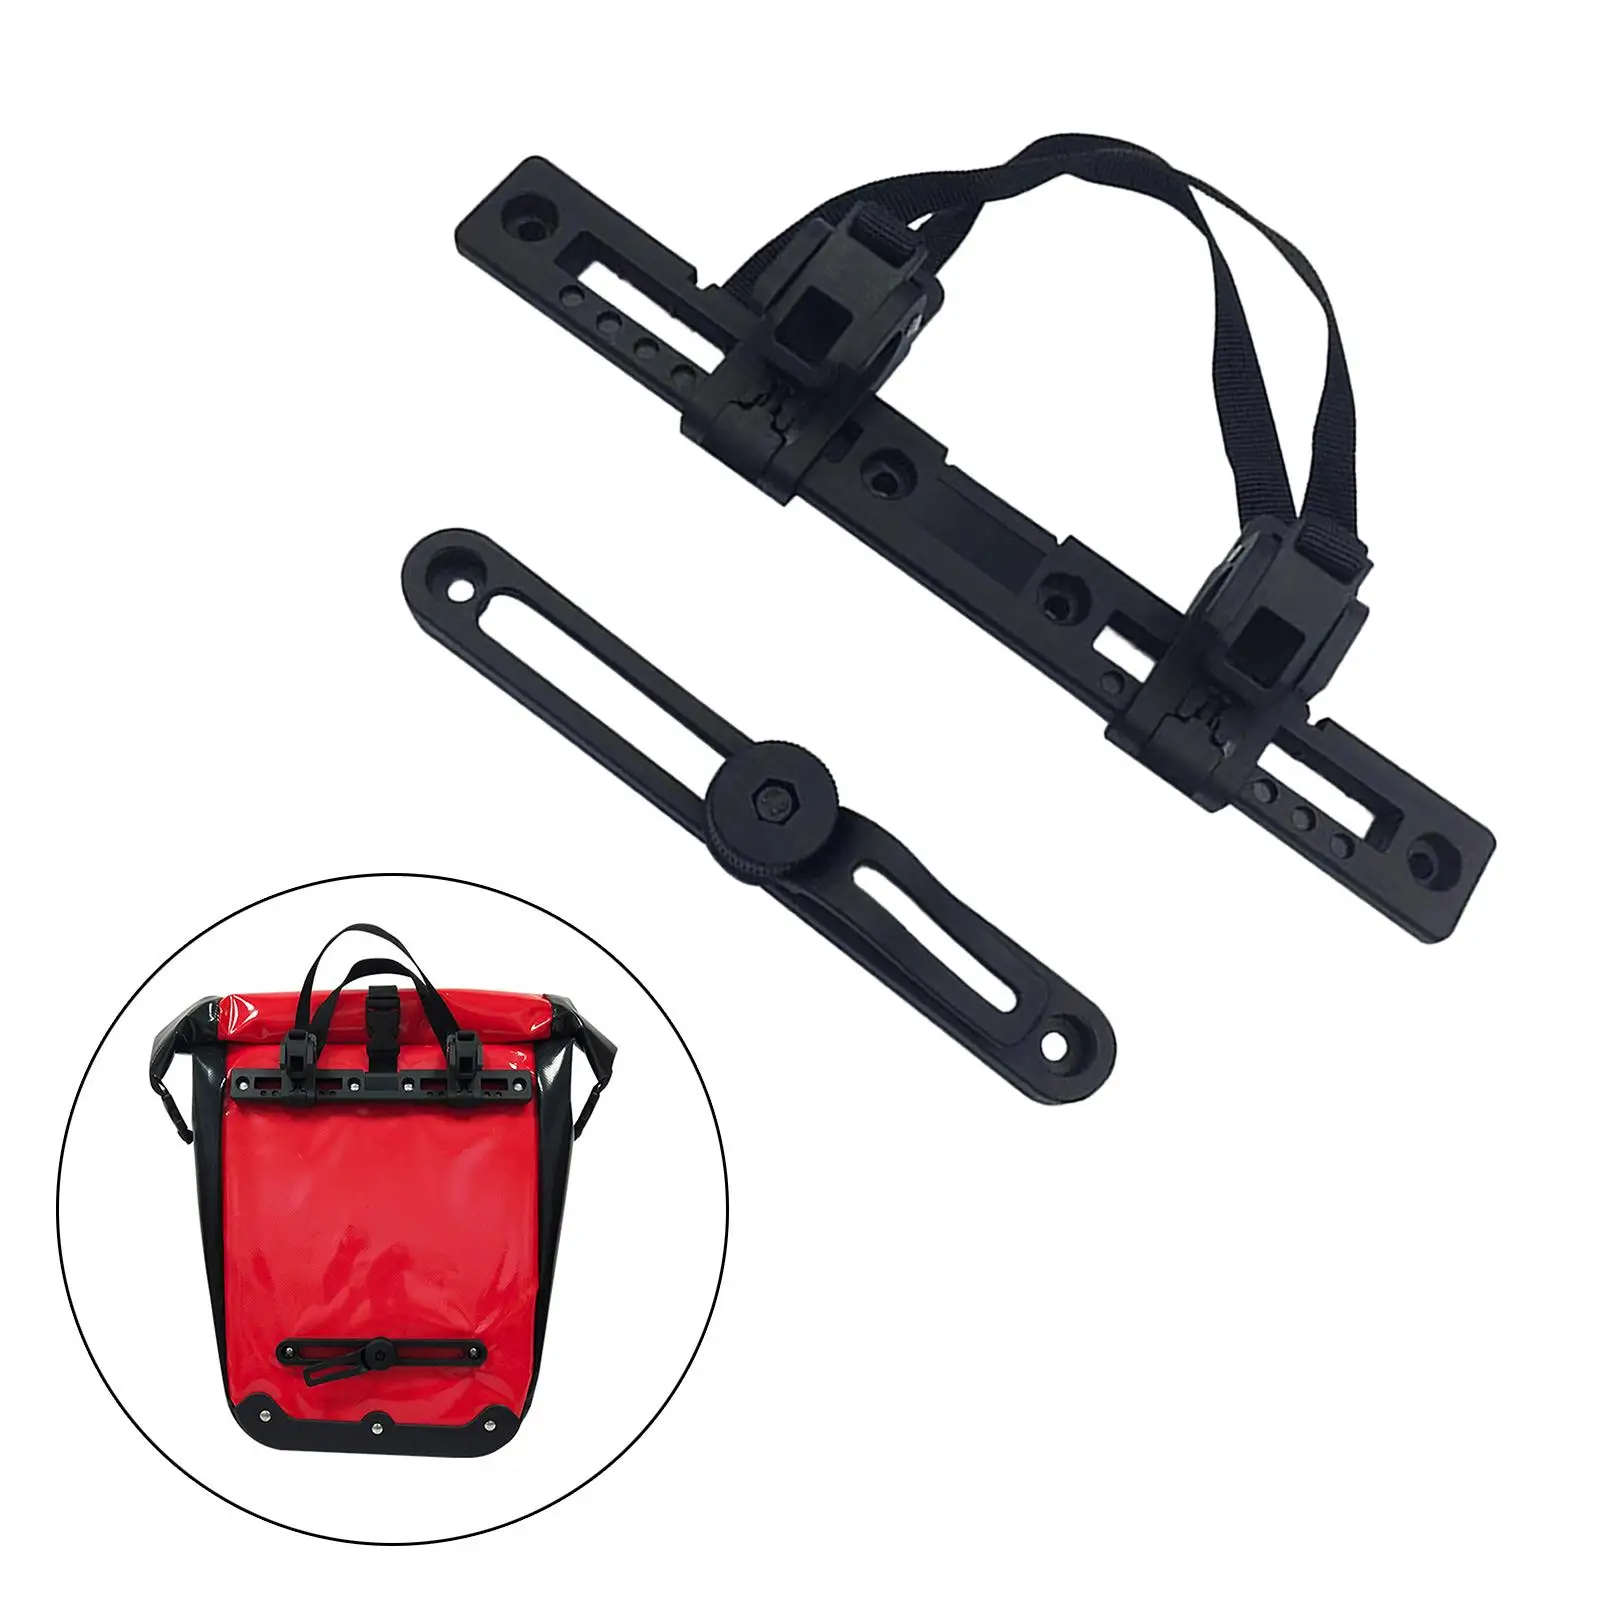 PVC Bike Bag Buckle Cycling Bike Bag Side Release Buckle Convenient for Bicycle Bags